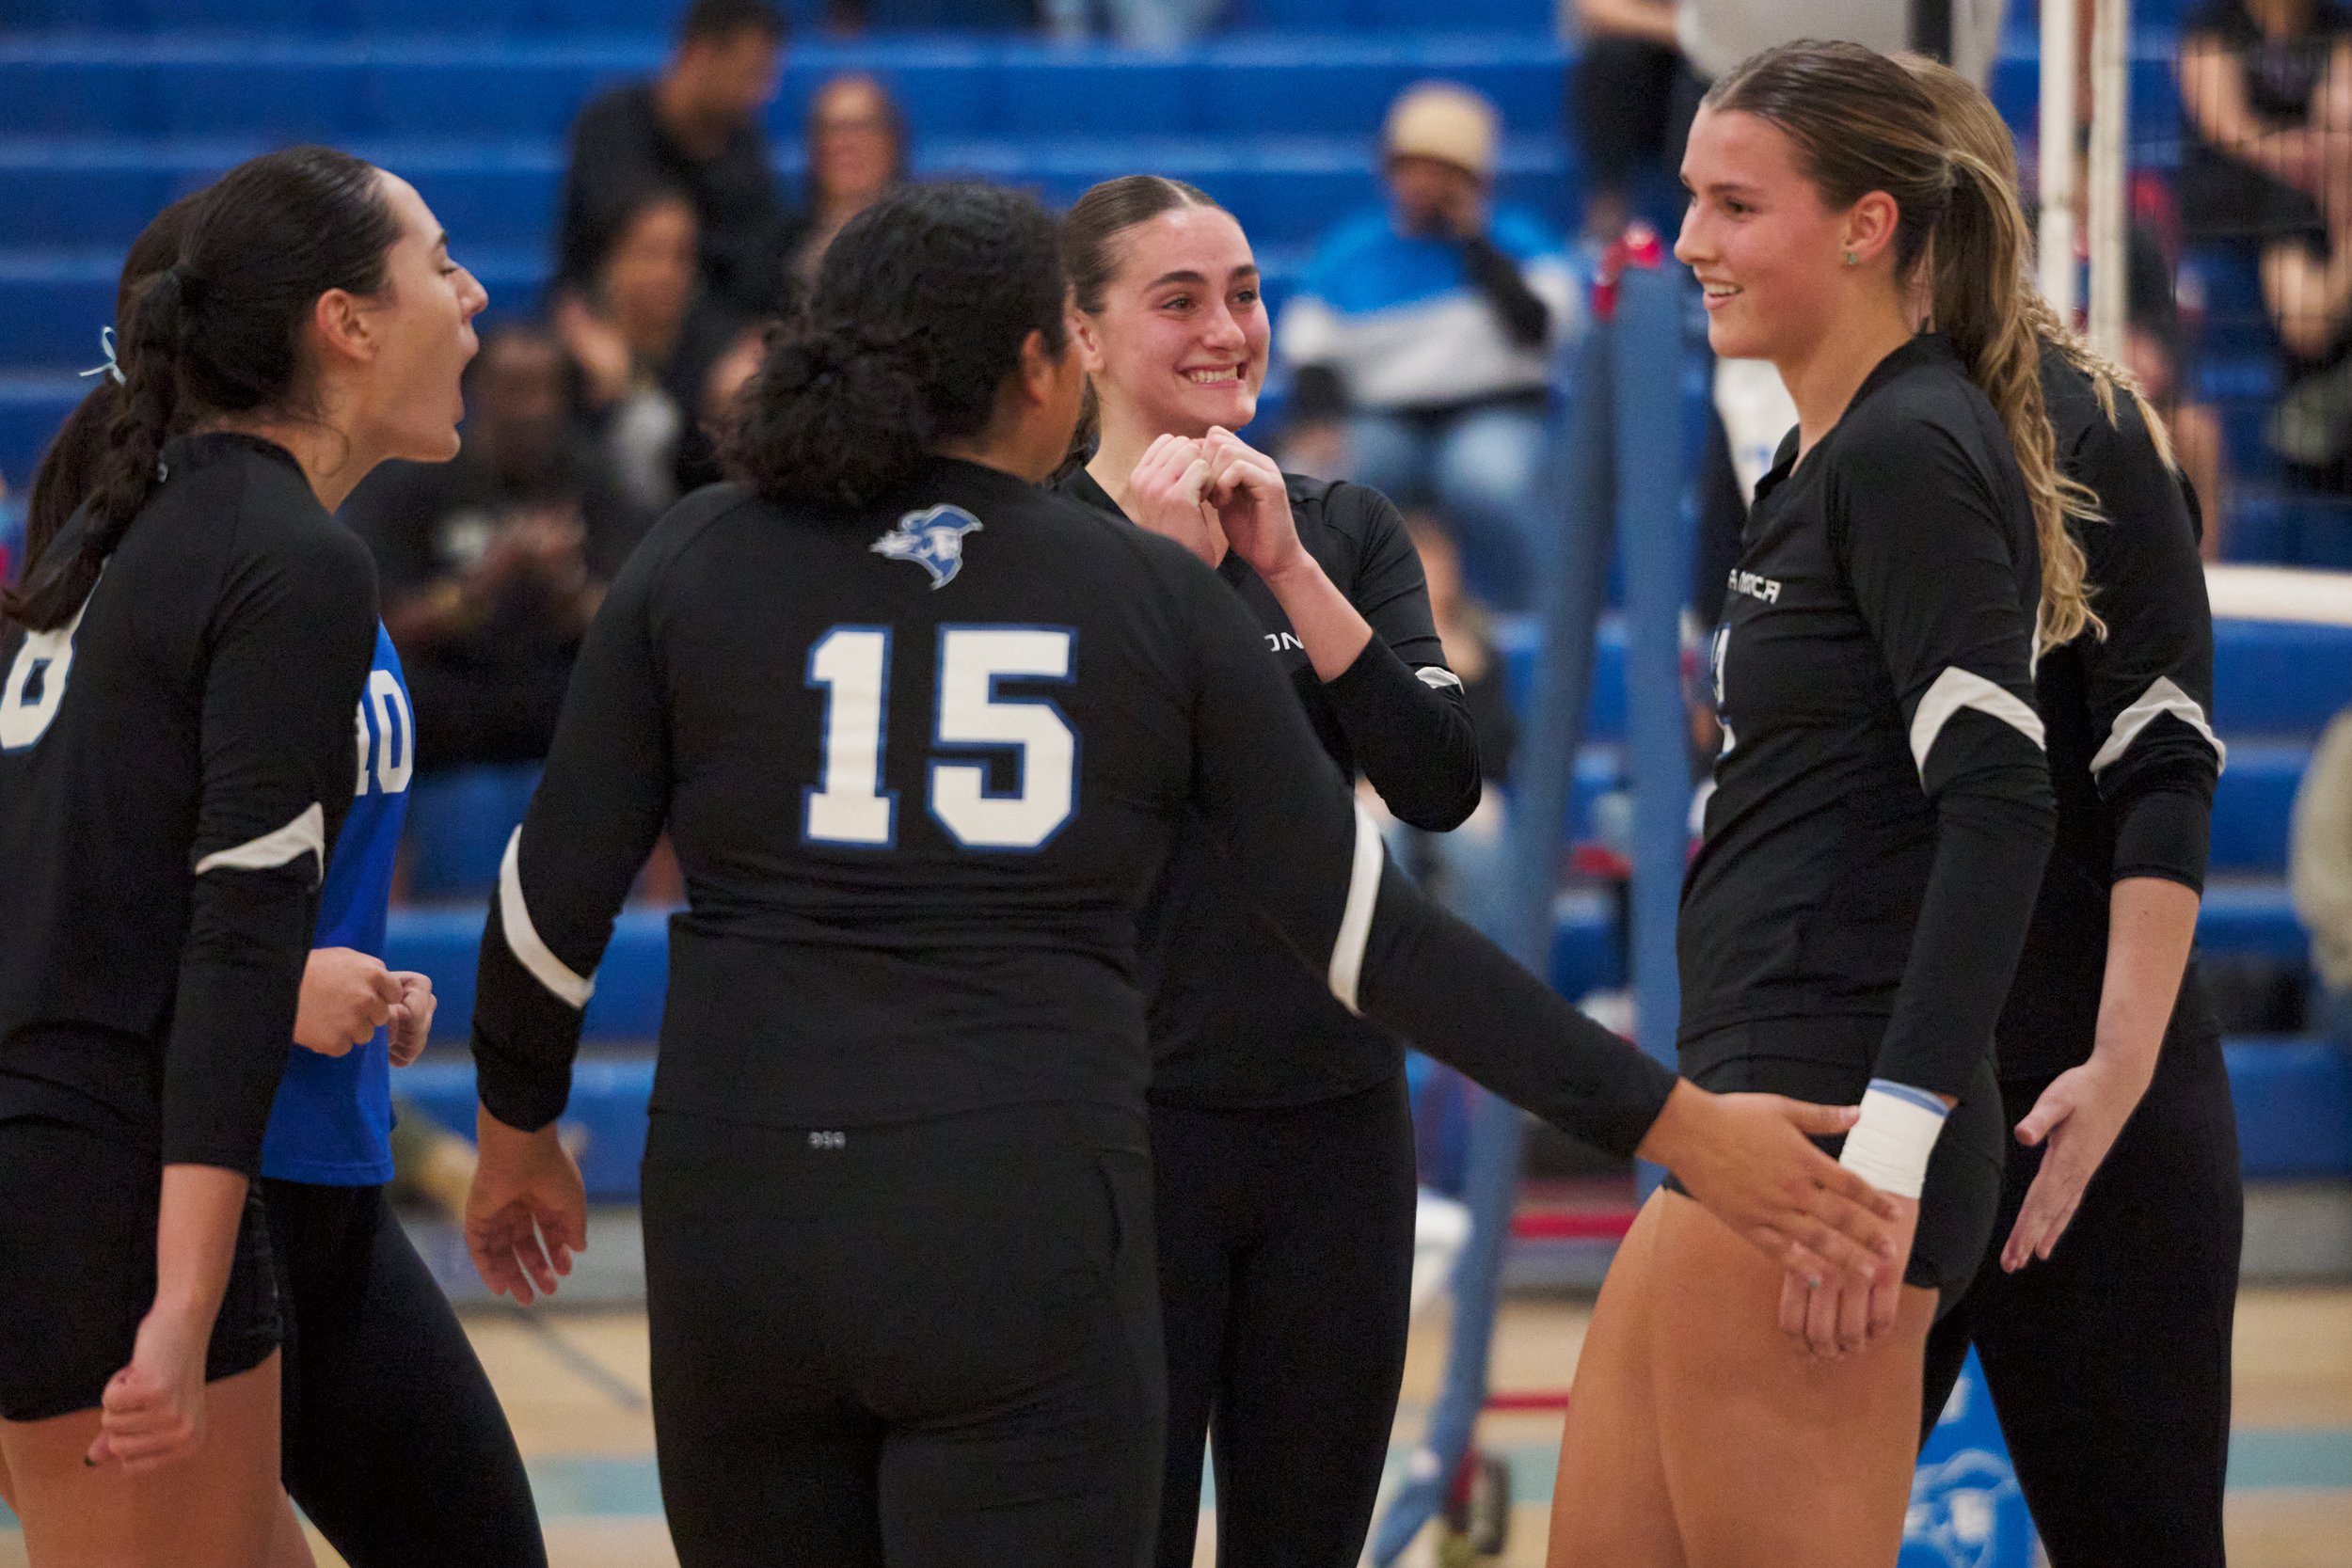  Santa Monica College Corsairs' Natalie Fernandez (8), Sophia Odle (10), Jaylynn Fierro (15), Prior Borick (center), Mia Paulson (right), and Mylah Niksa (far right) gather after Paulson scored a kill during the women's volleyball match against the B